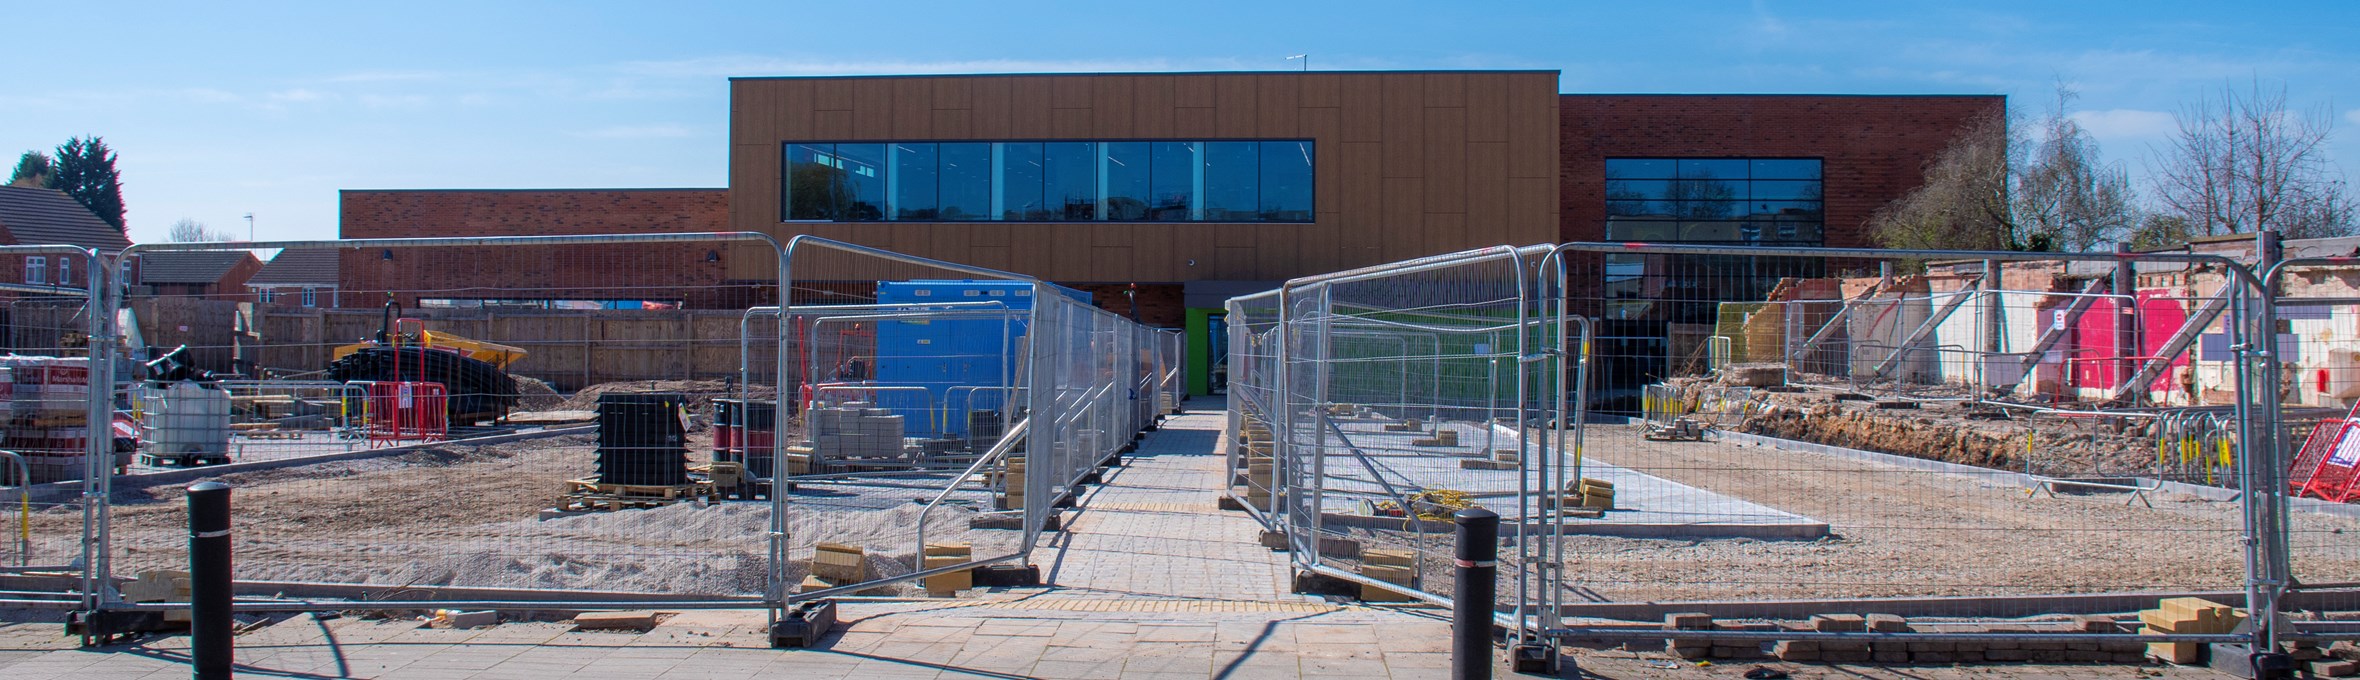 the new entrance to Kirkby Leisure Centre 